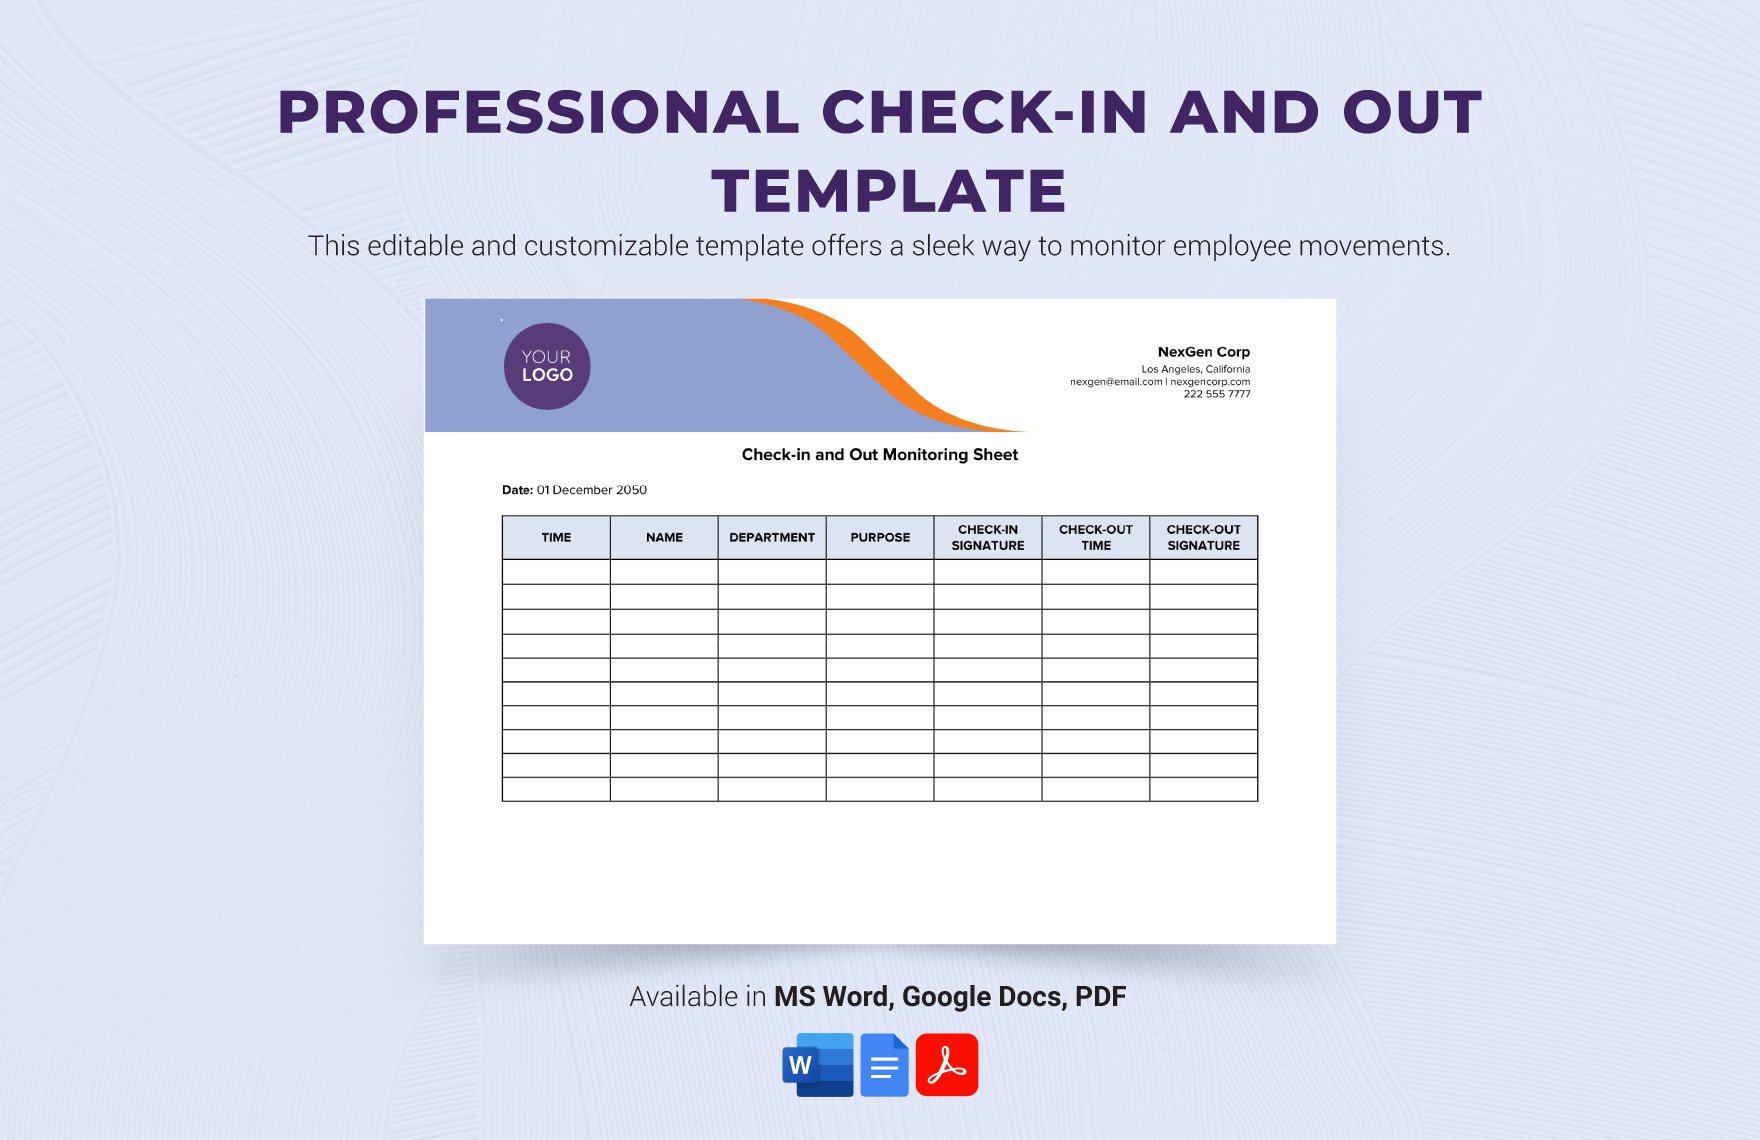 Free Professional Check-in and Out Template in Word, Google Docs, PDF